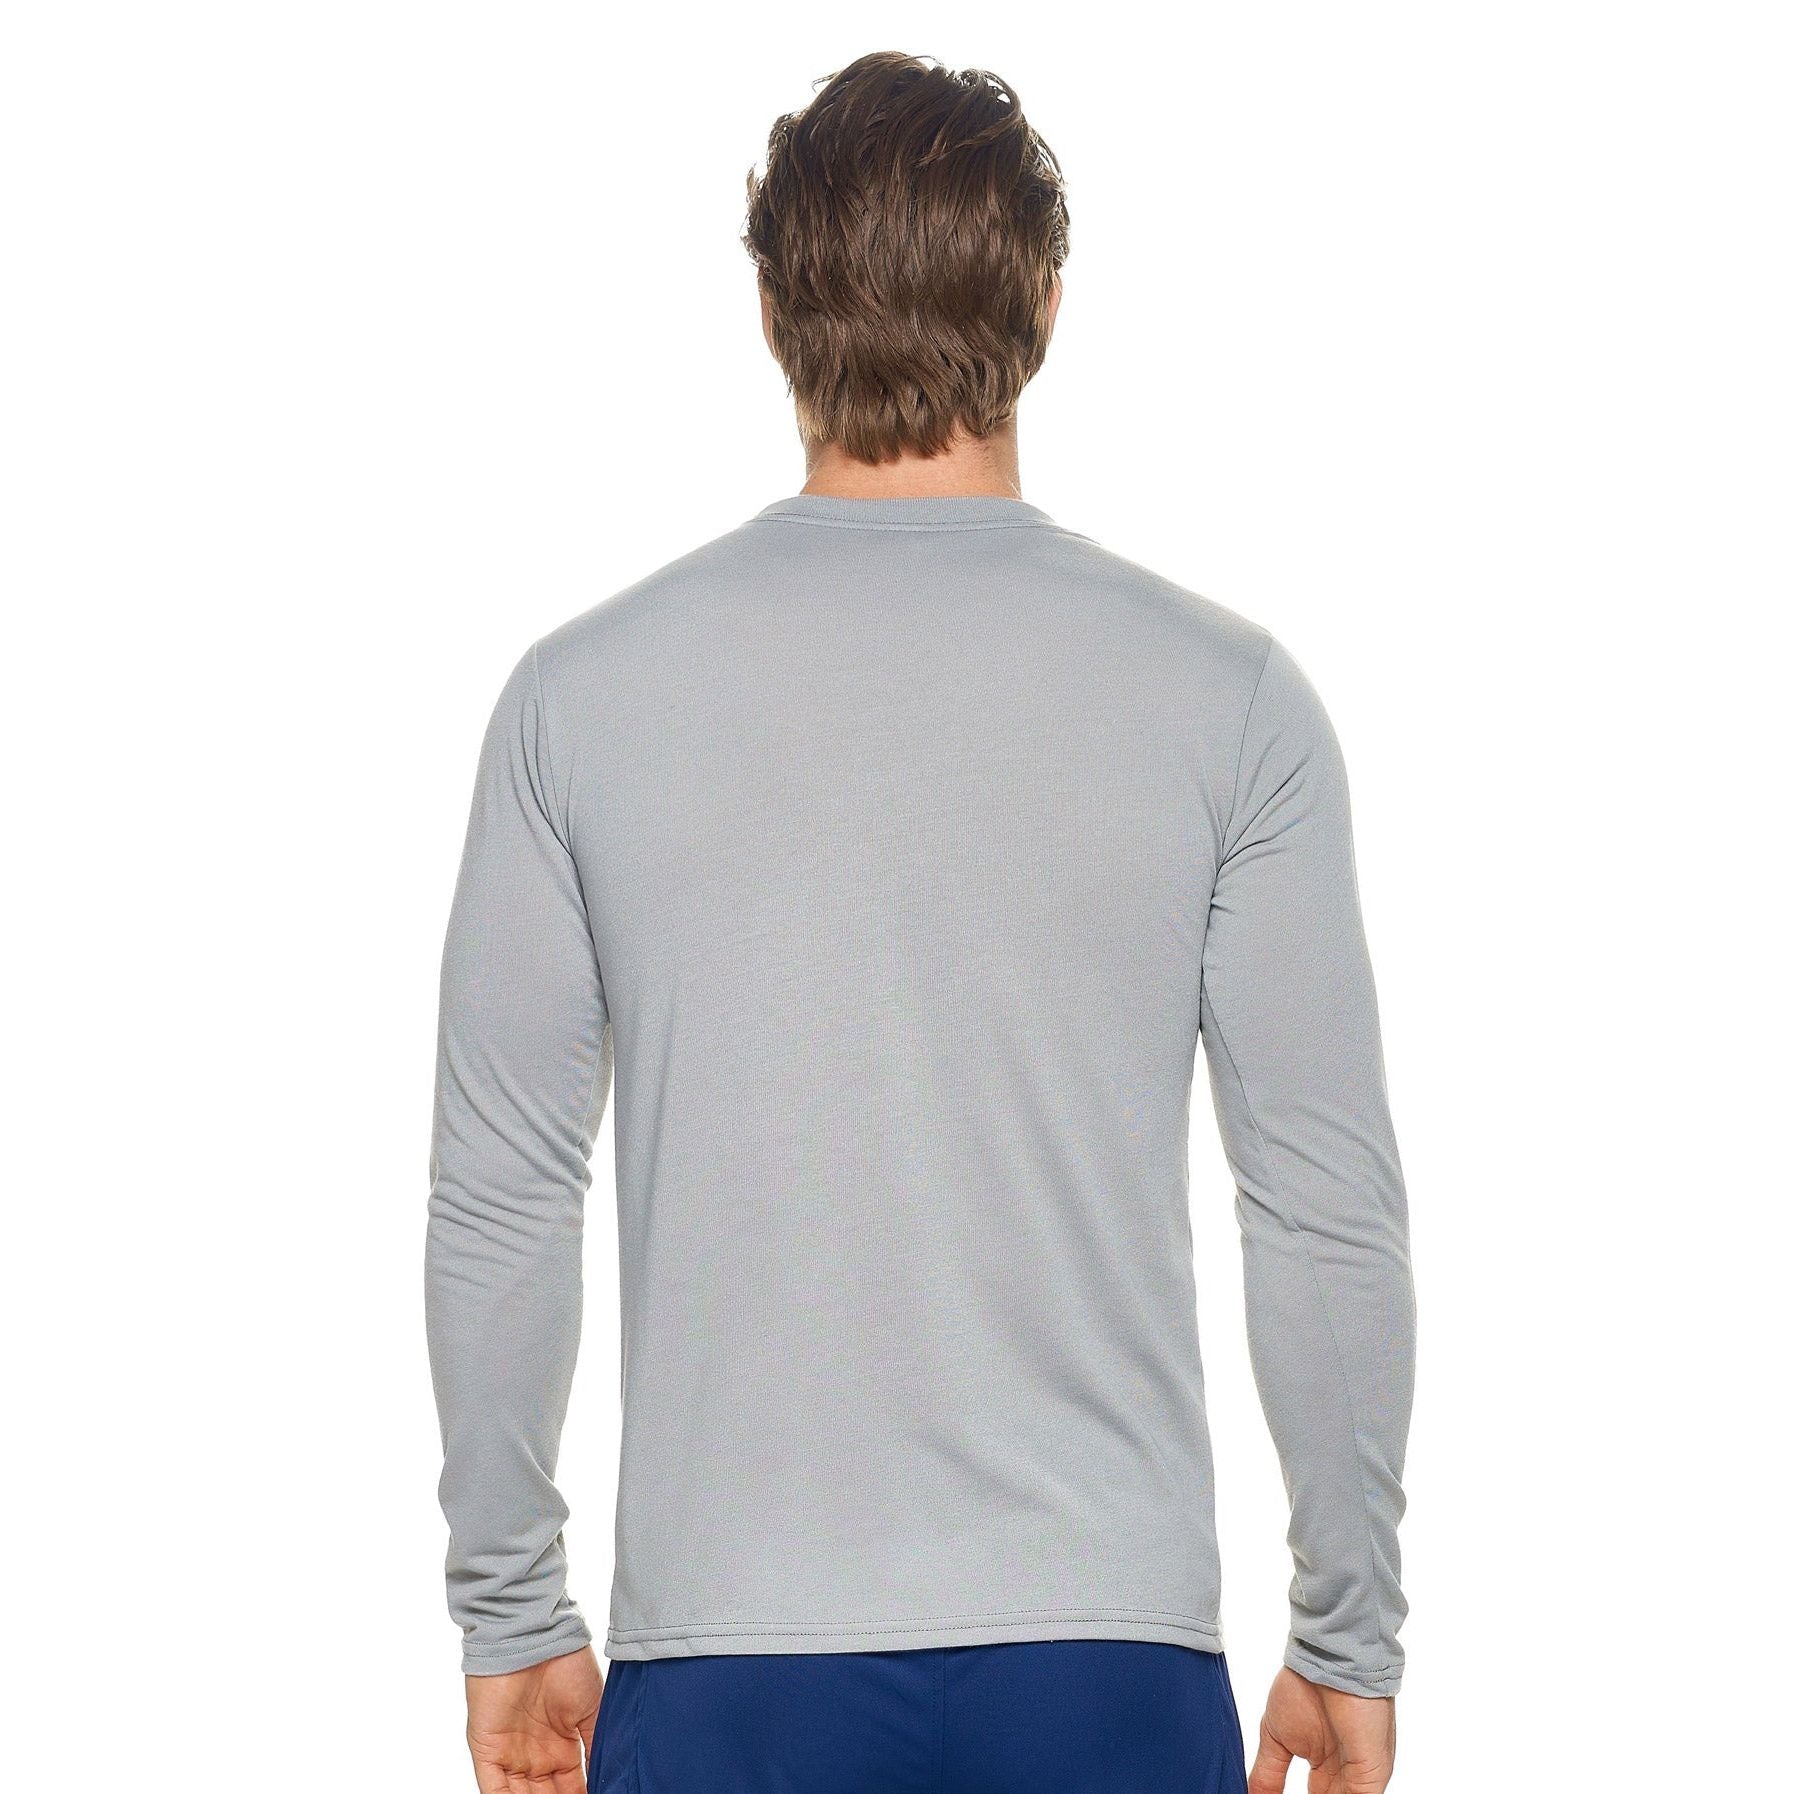 Men's Long Sleeve T-shirts - In the Field us - KME means the very best